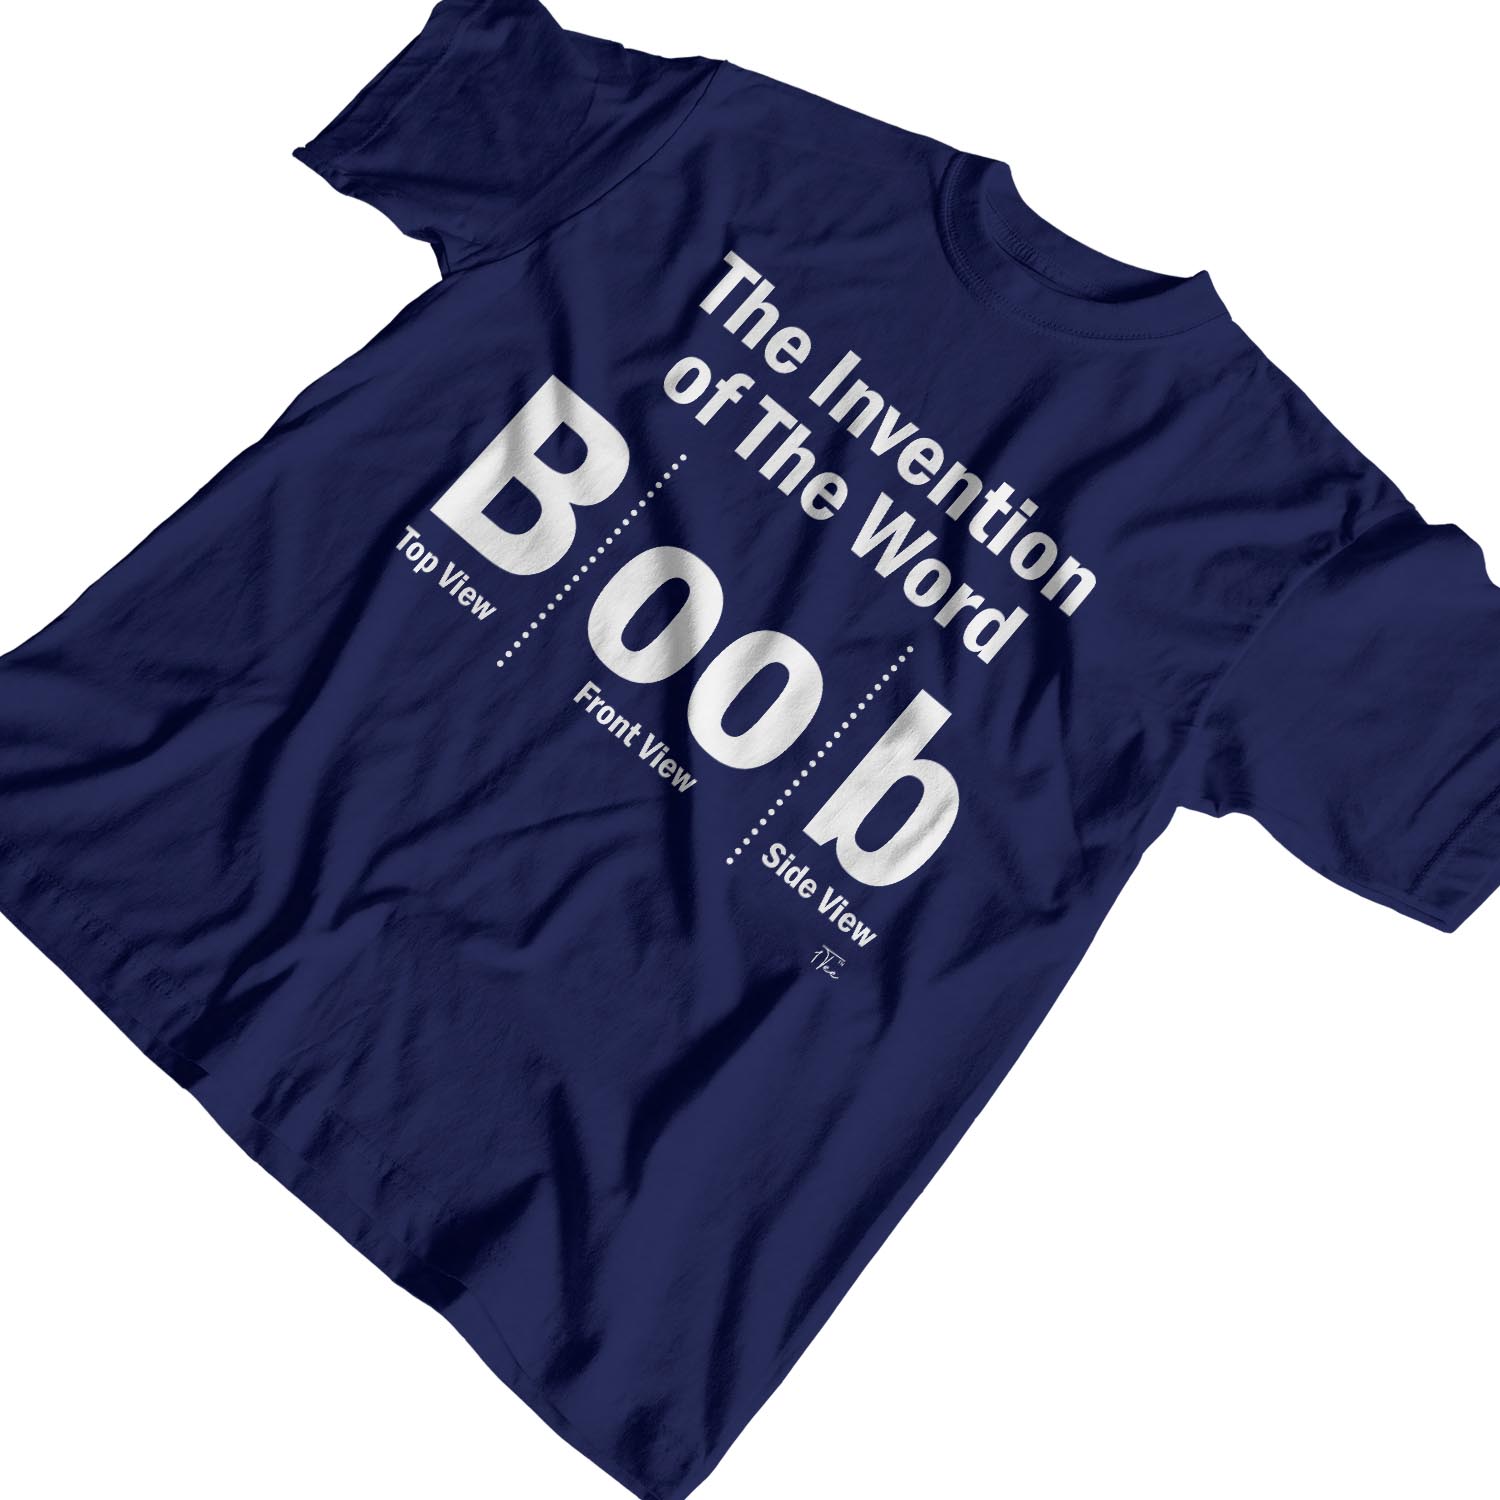 Invention Of The Word Boob Classic T-shirt. By Artistshot